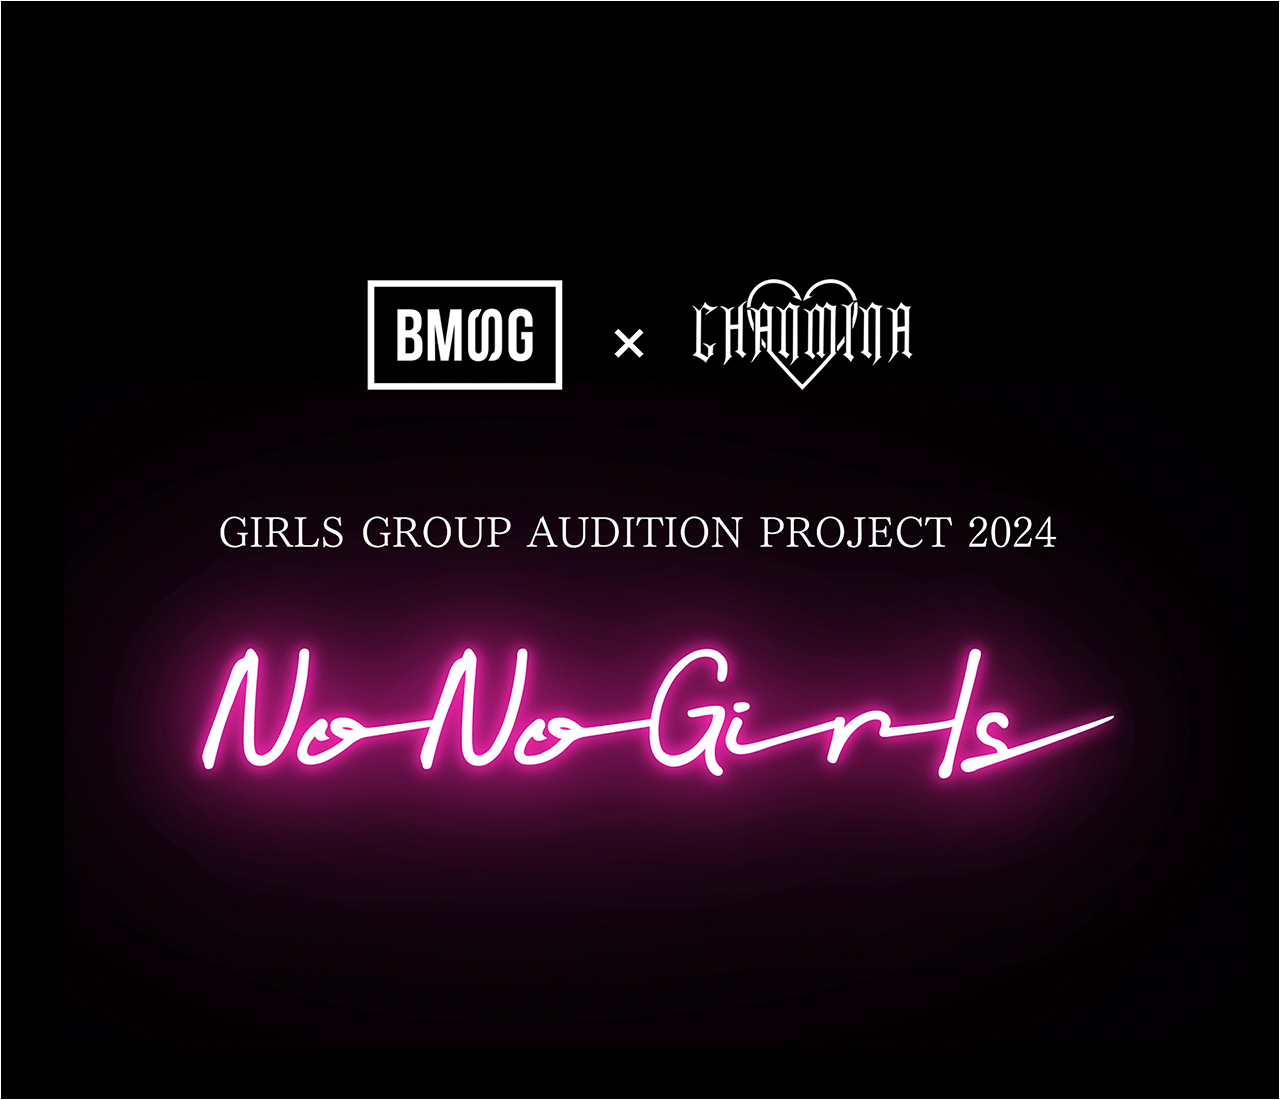 BMSG×ちゃんみな GIRLS GROUP AUDITION PROJECT 2024 -No No Girls-